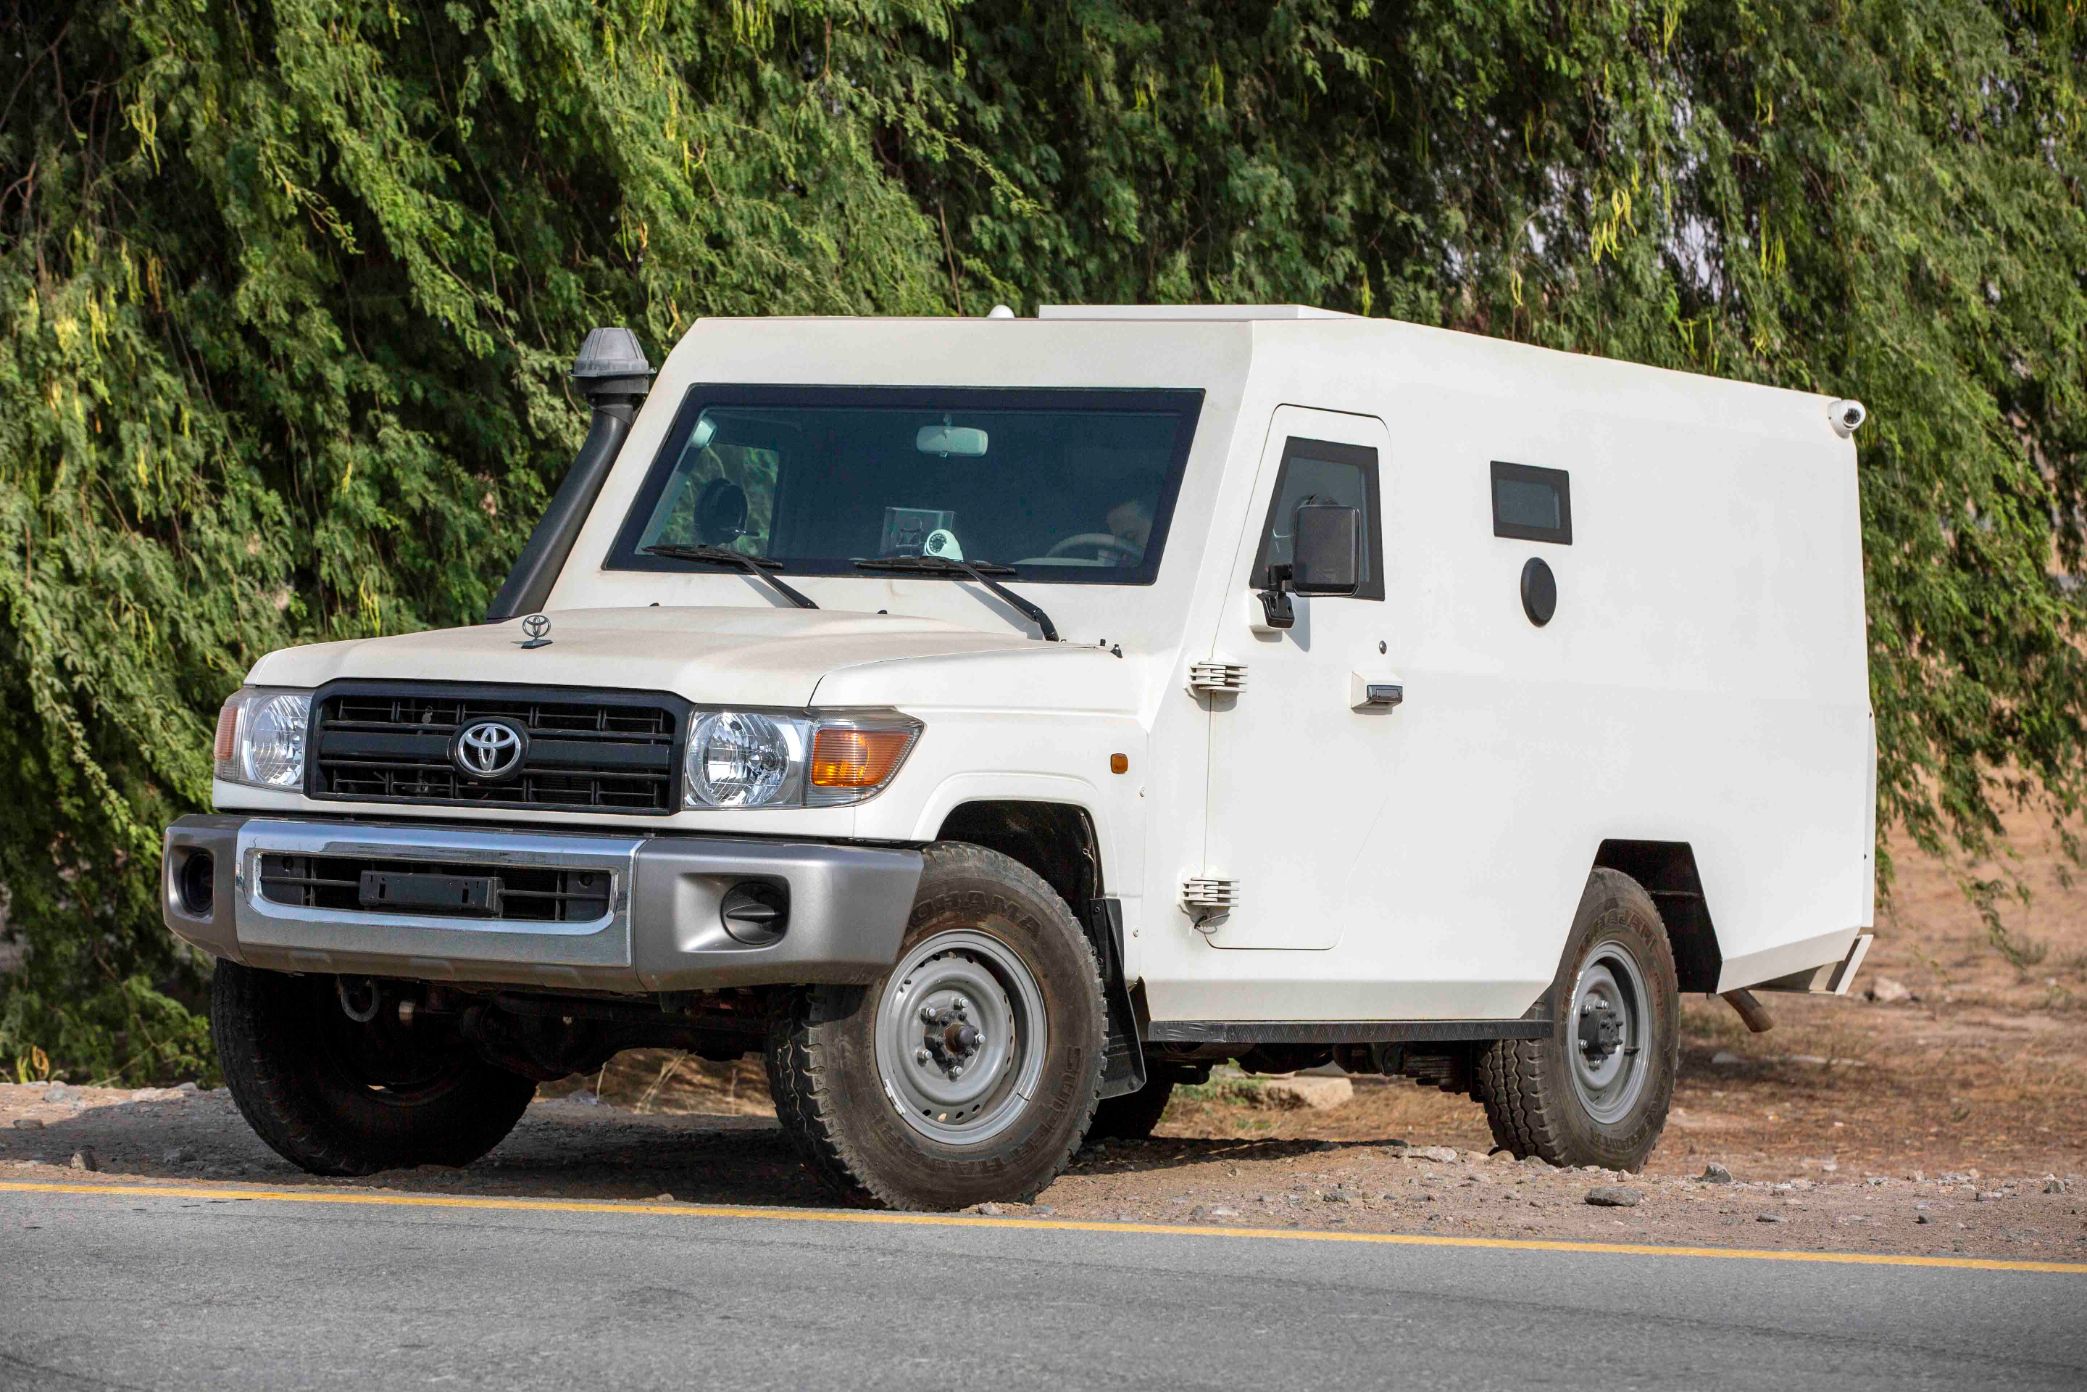        The Mahindra Armoured Toyota Land Cruiser 78 Cash in Transit